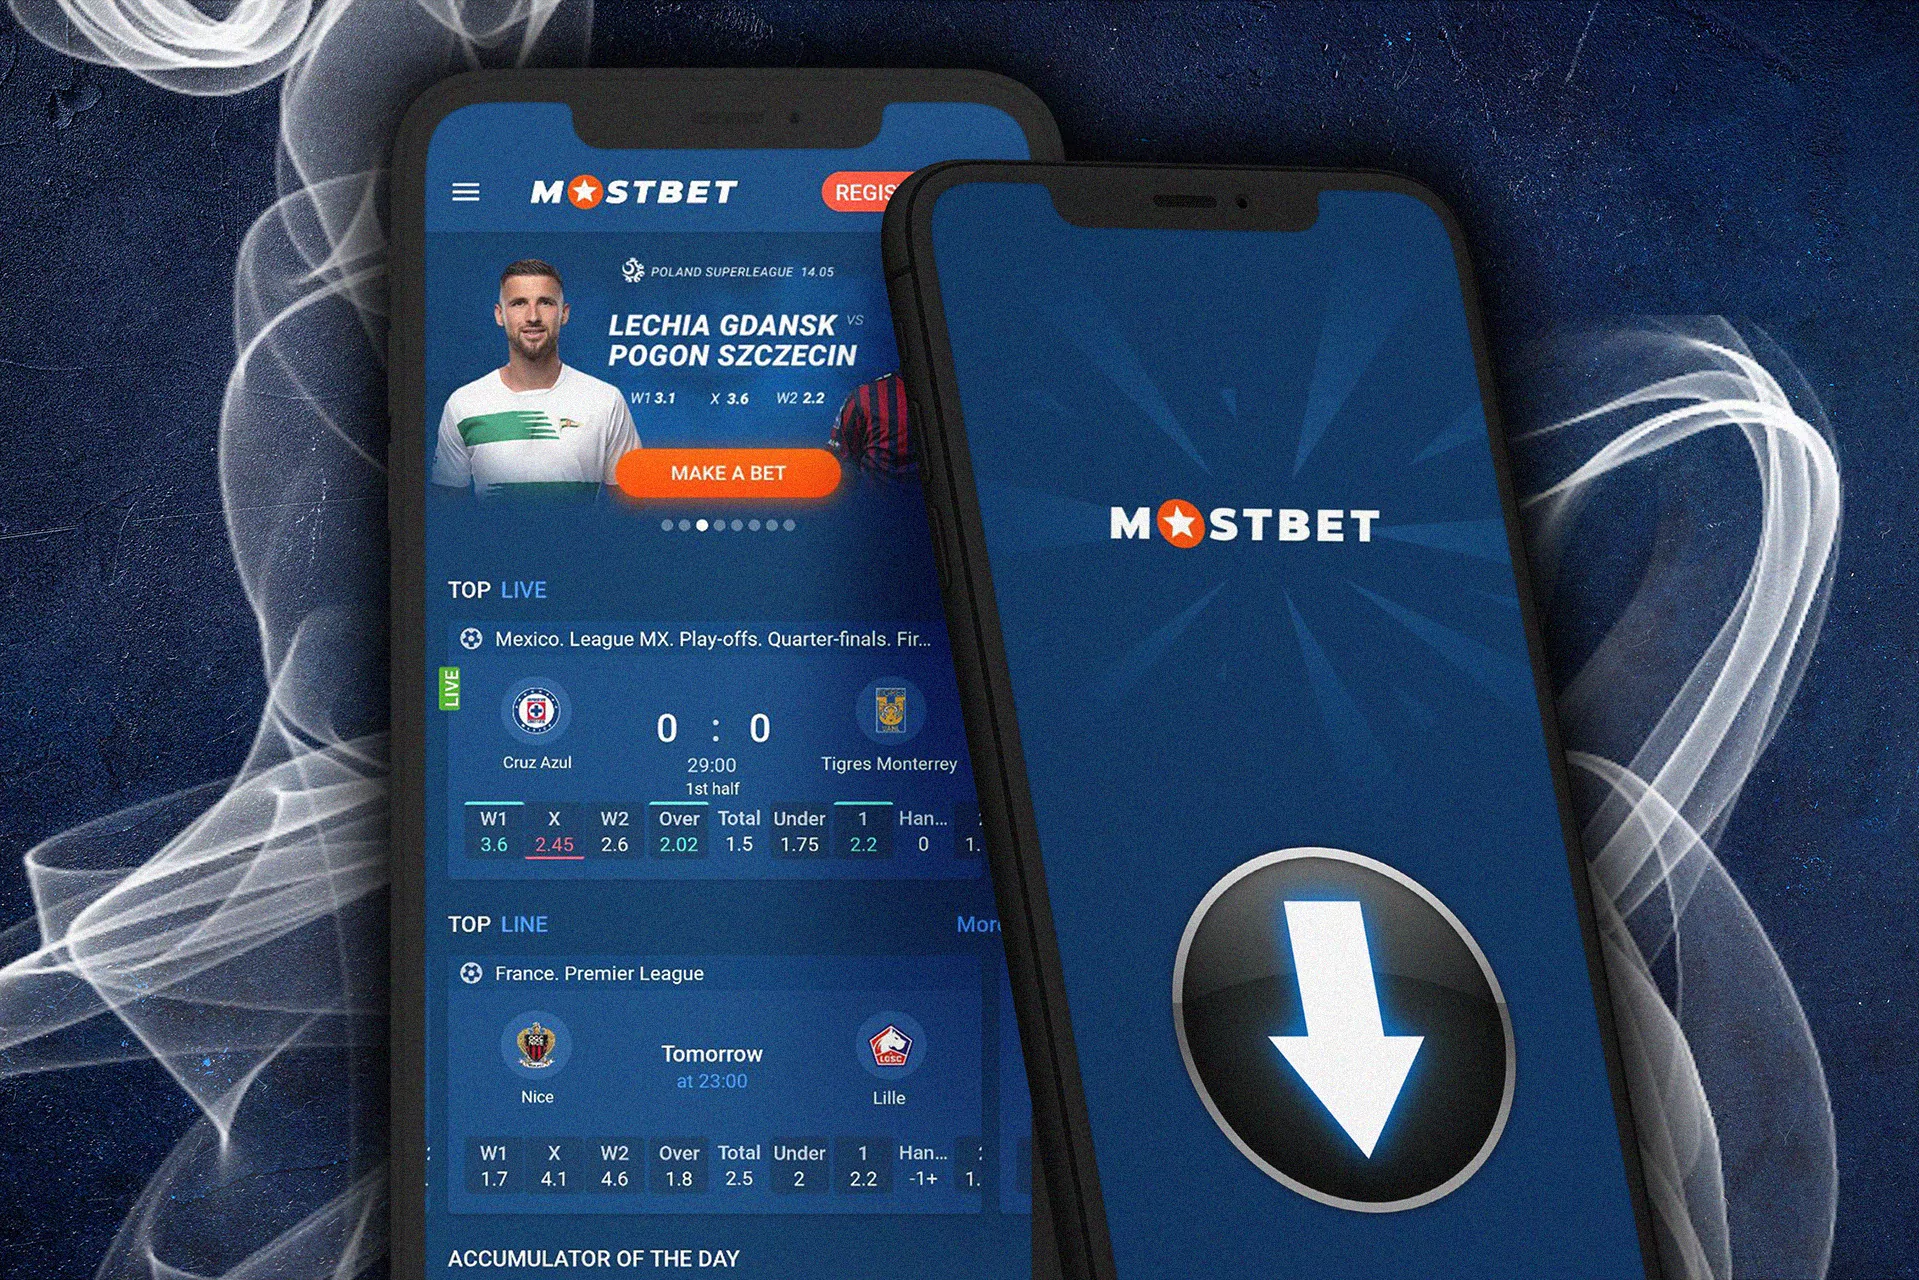 Download the Mostbet app for more convenient betting.